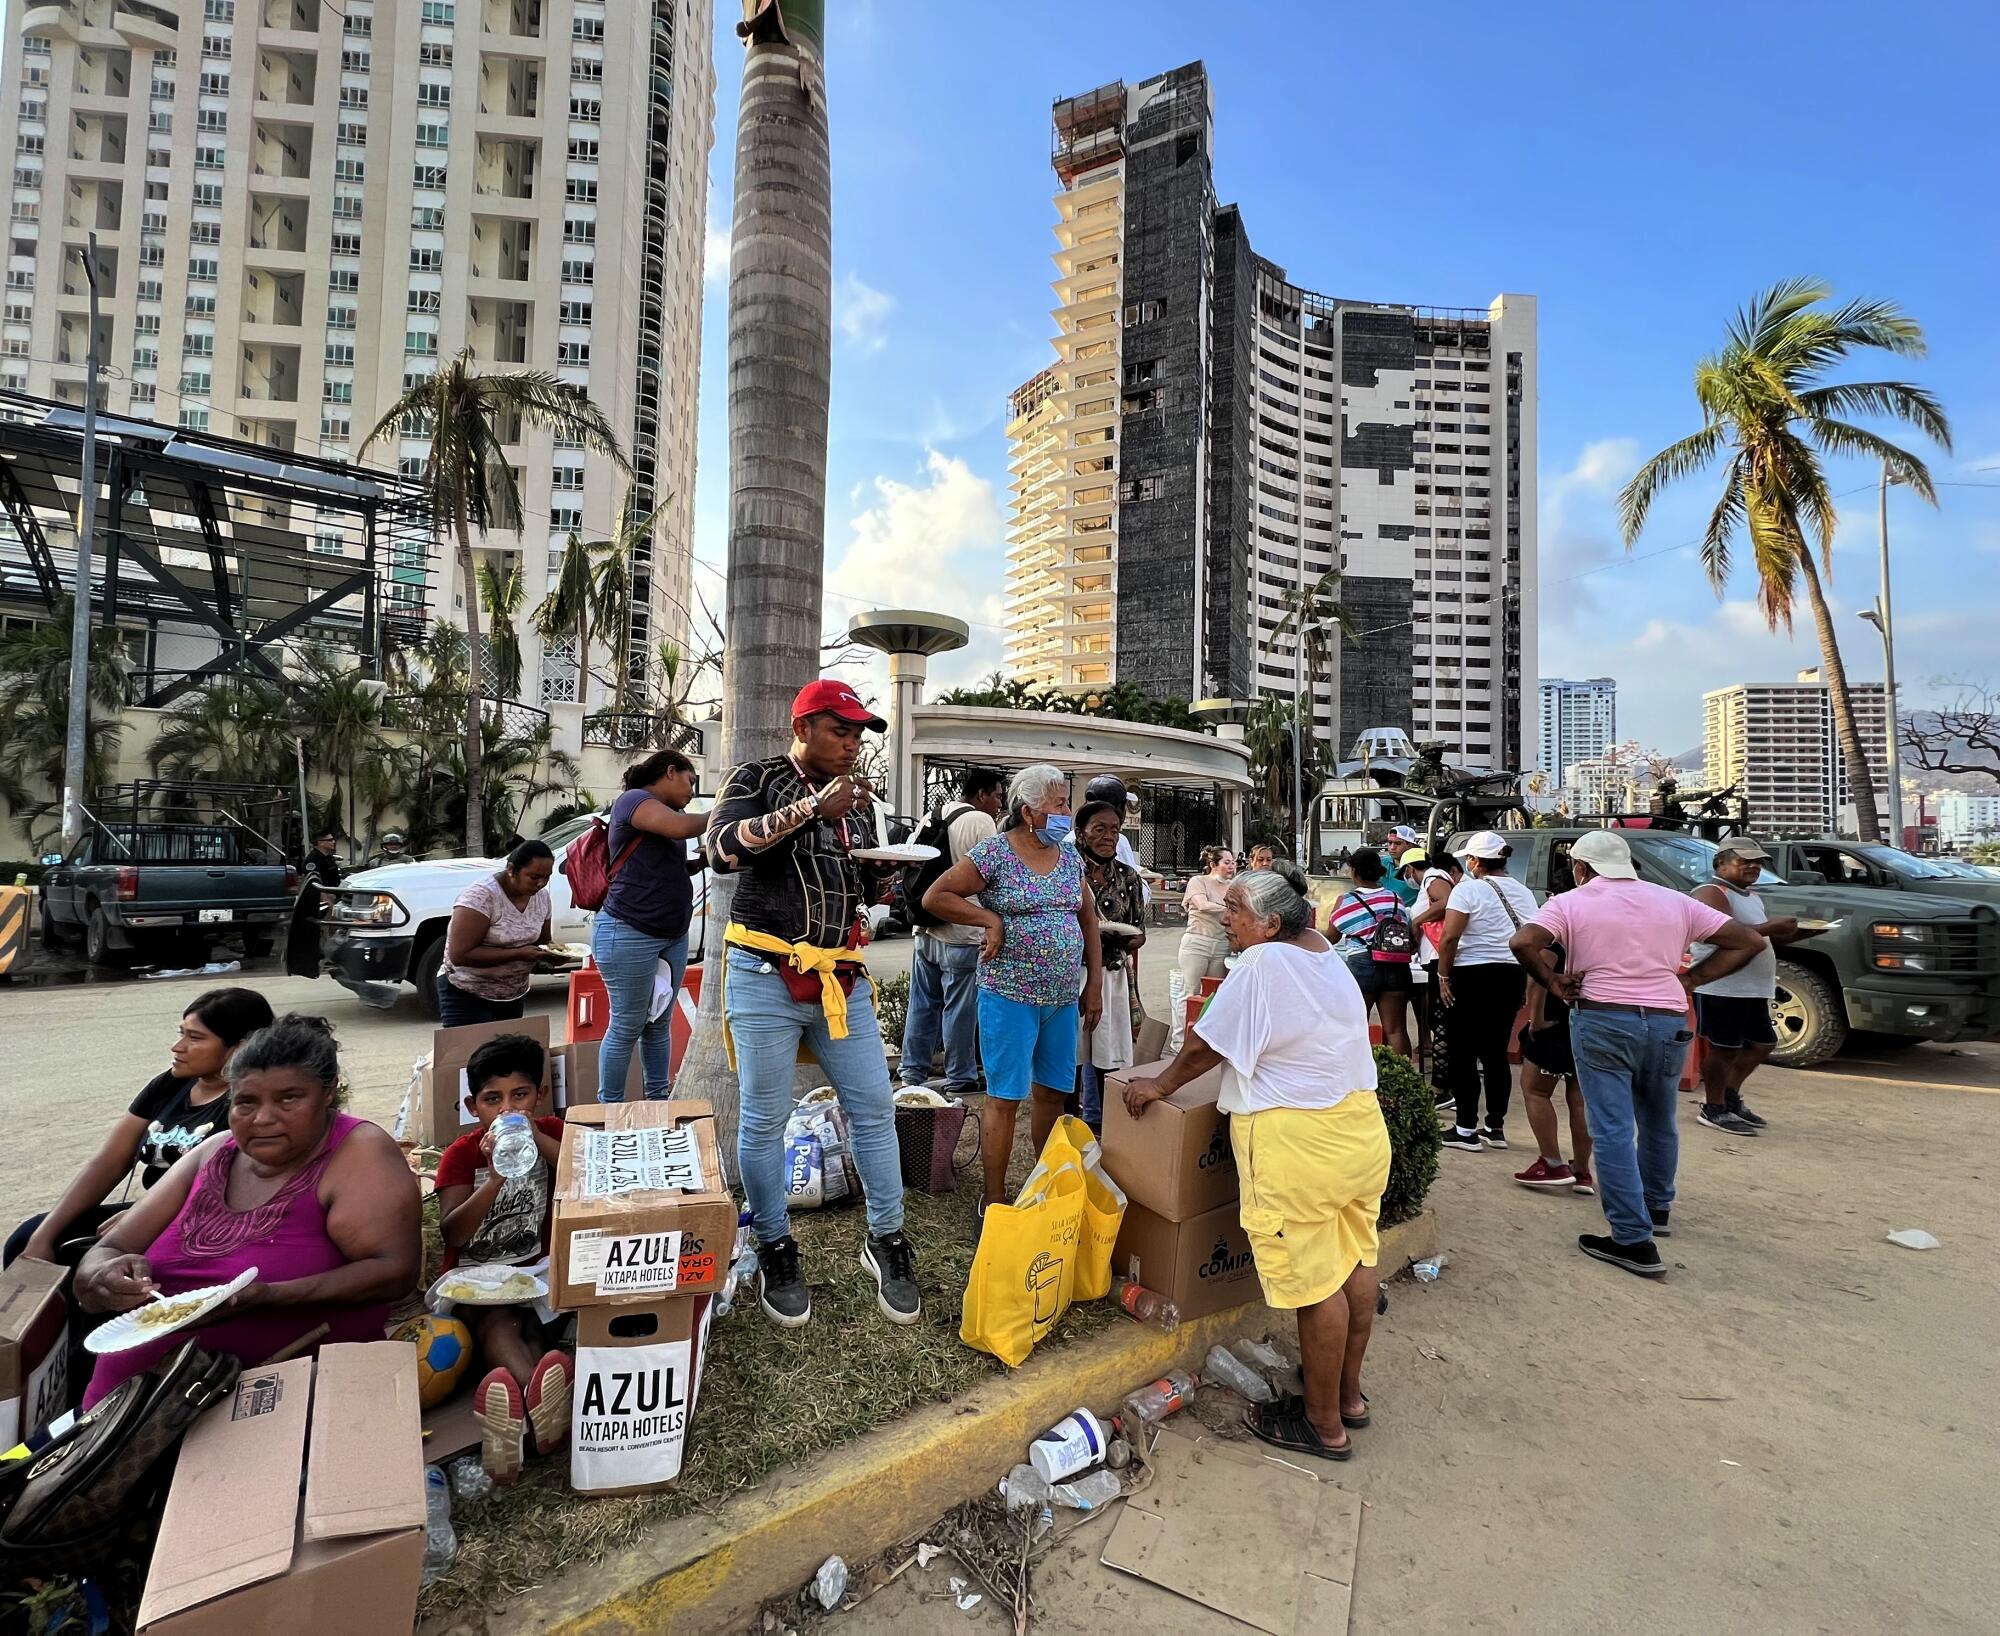 Acapulco residents line up for food.